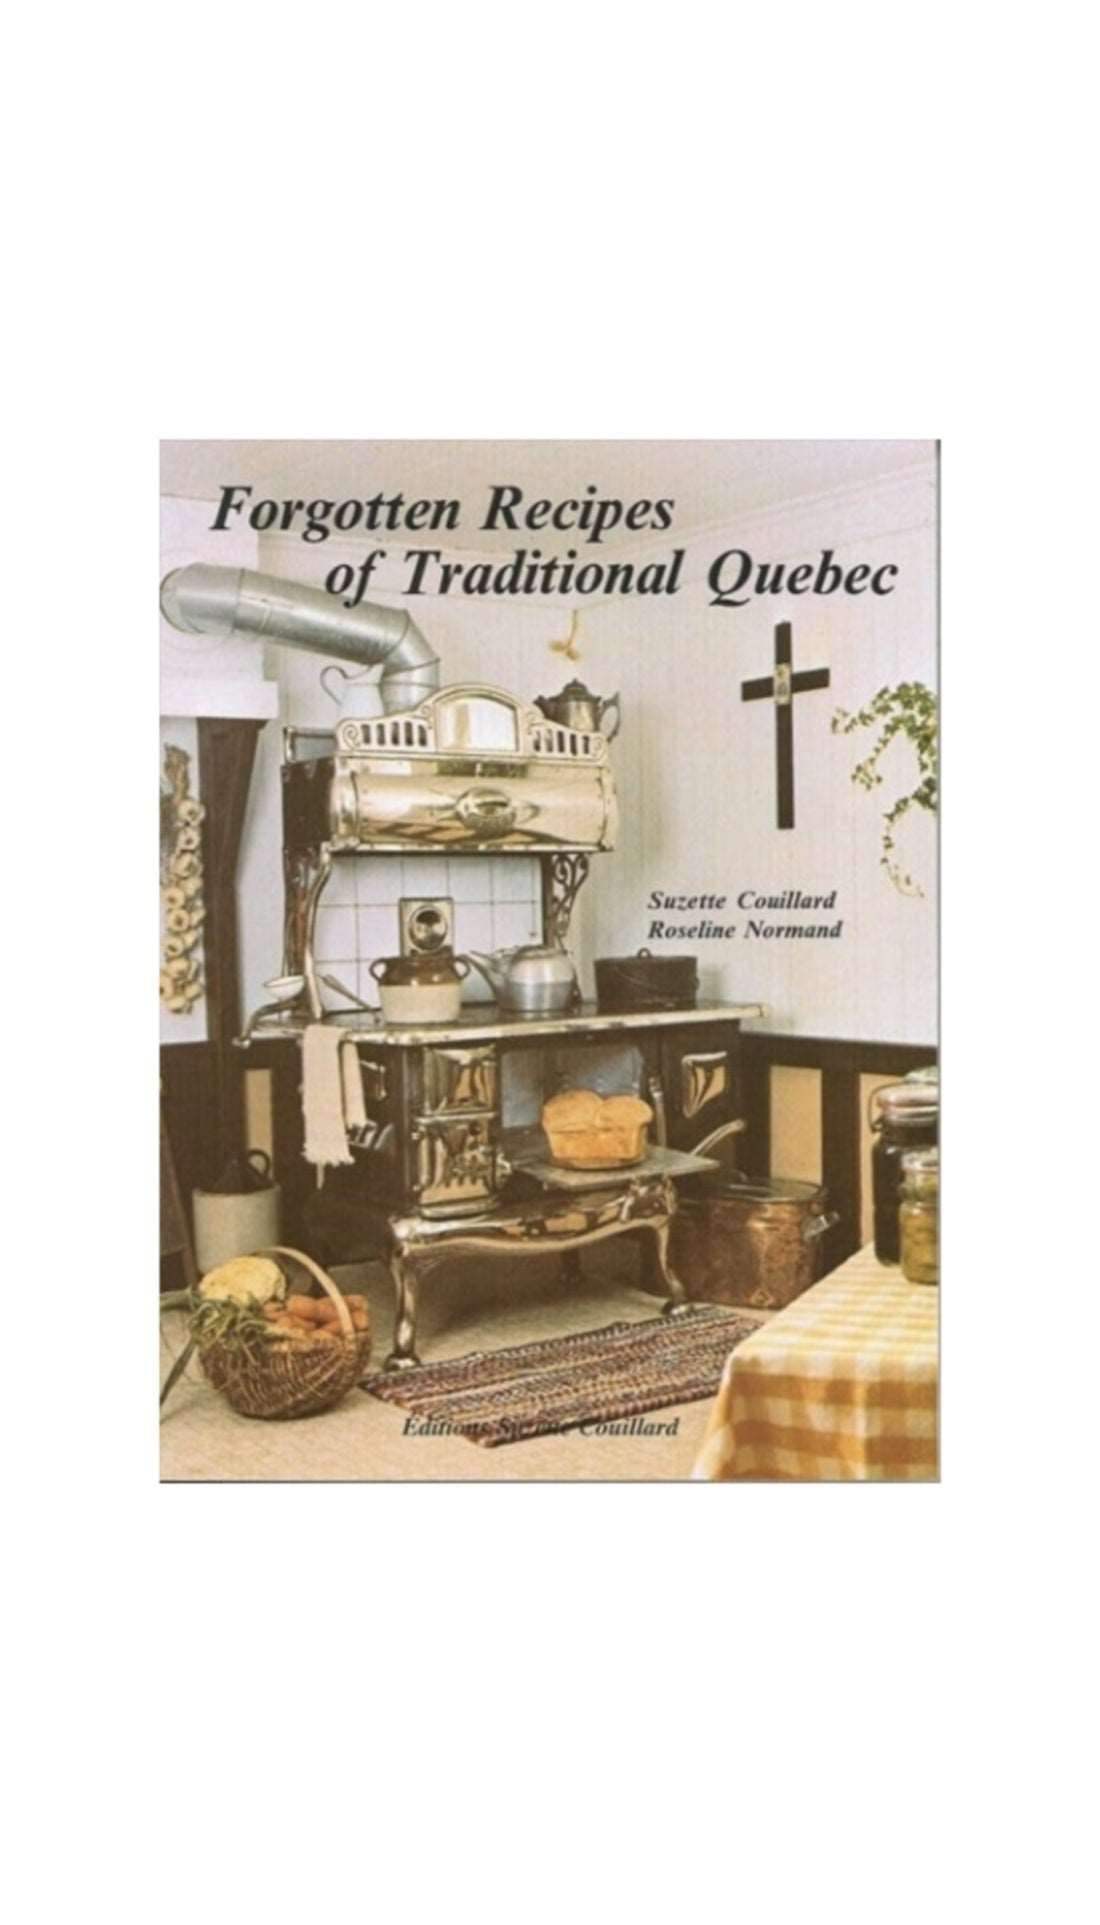 Forgotten Recipes of Traditional Quebec / SUZETTE COUILLARD & ROSELINE NORMAND